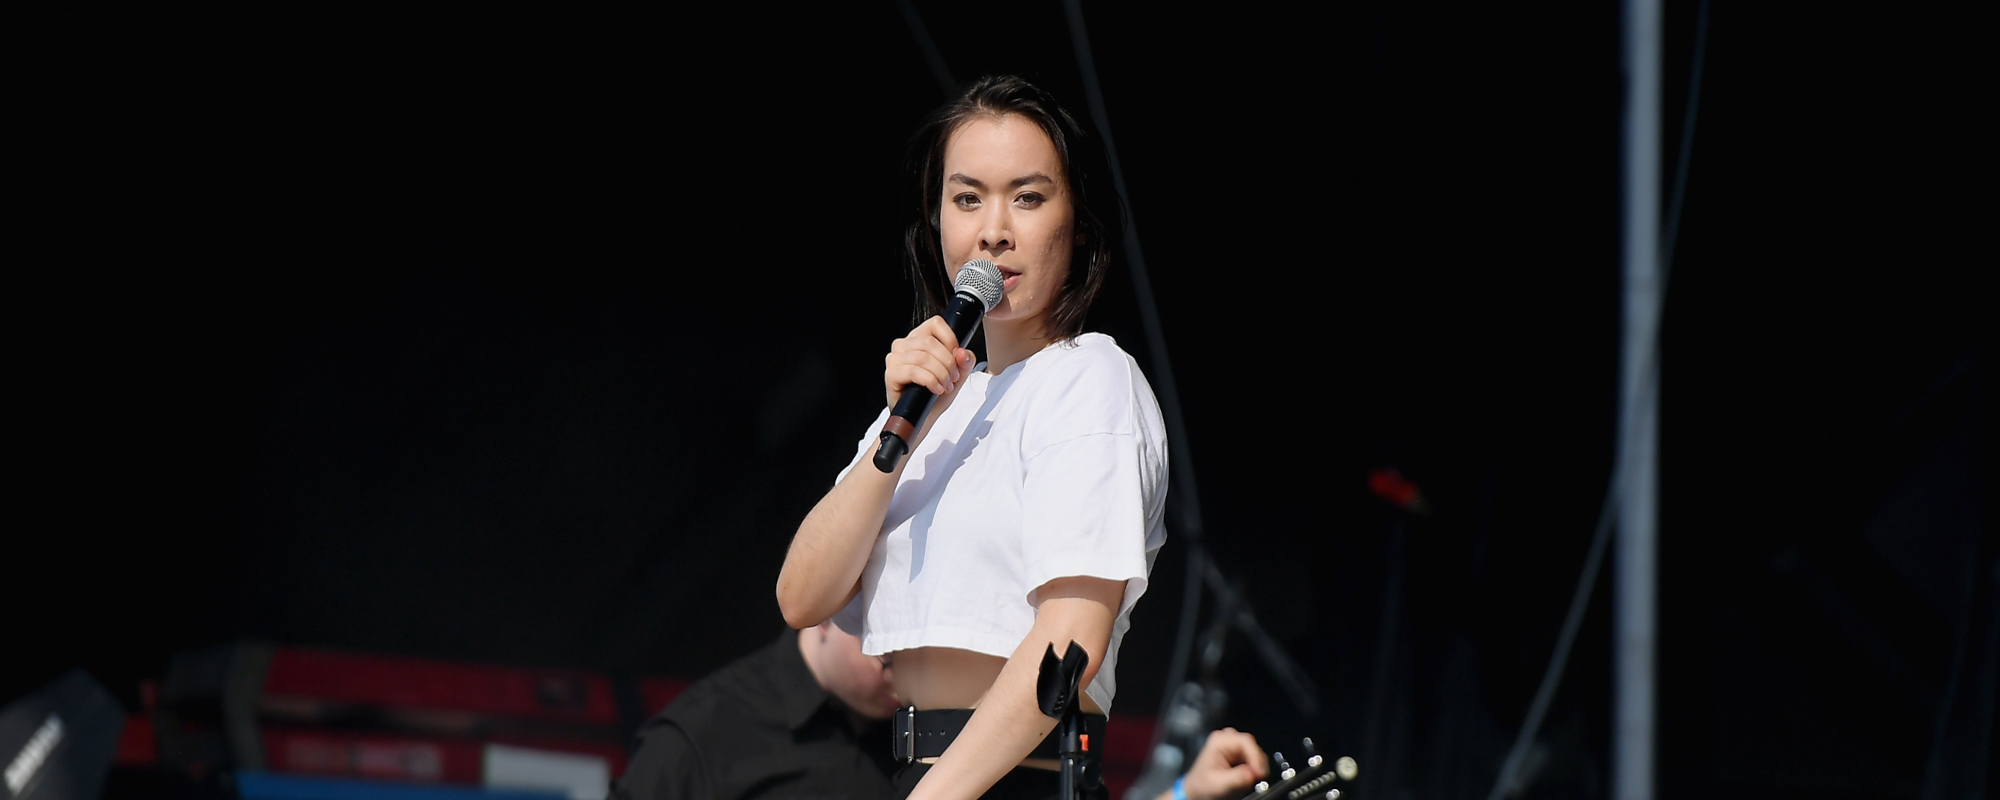 Mitski Tapped to Write Music for New ‘The Queen’s Gambit’ Musical